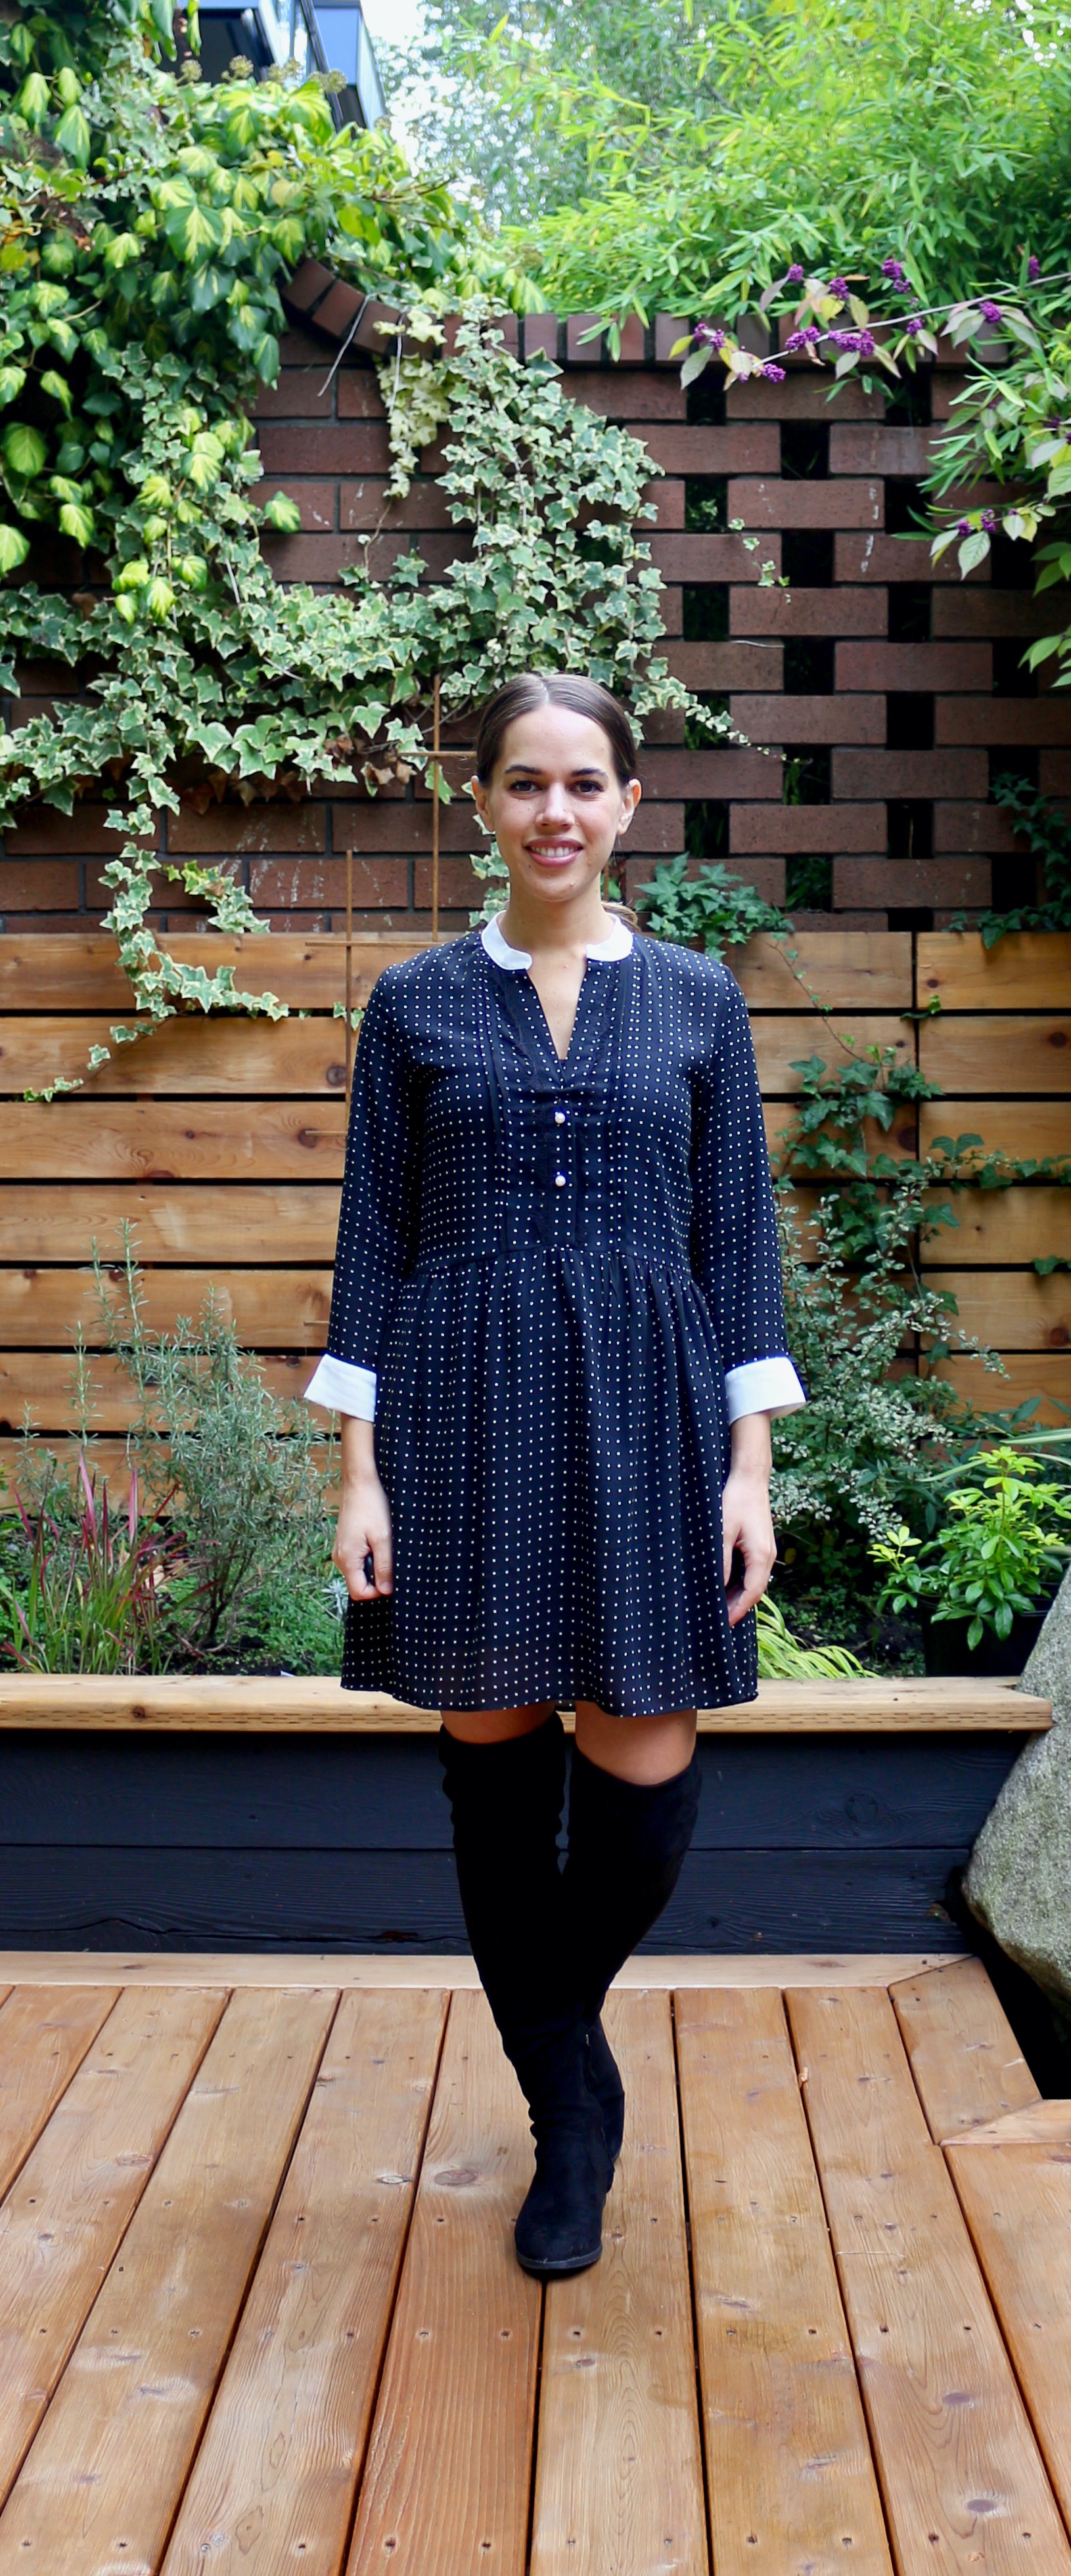 Jules in Flats - Polka Dot Swing Mini Dress with OTK Boots (Business Casual Workwear on a Budget)